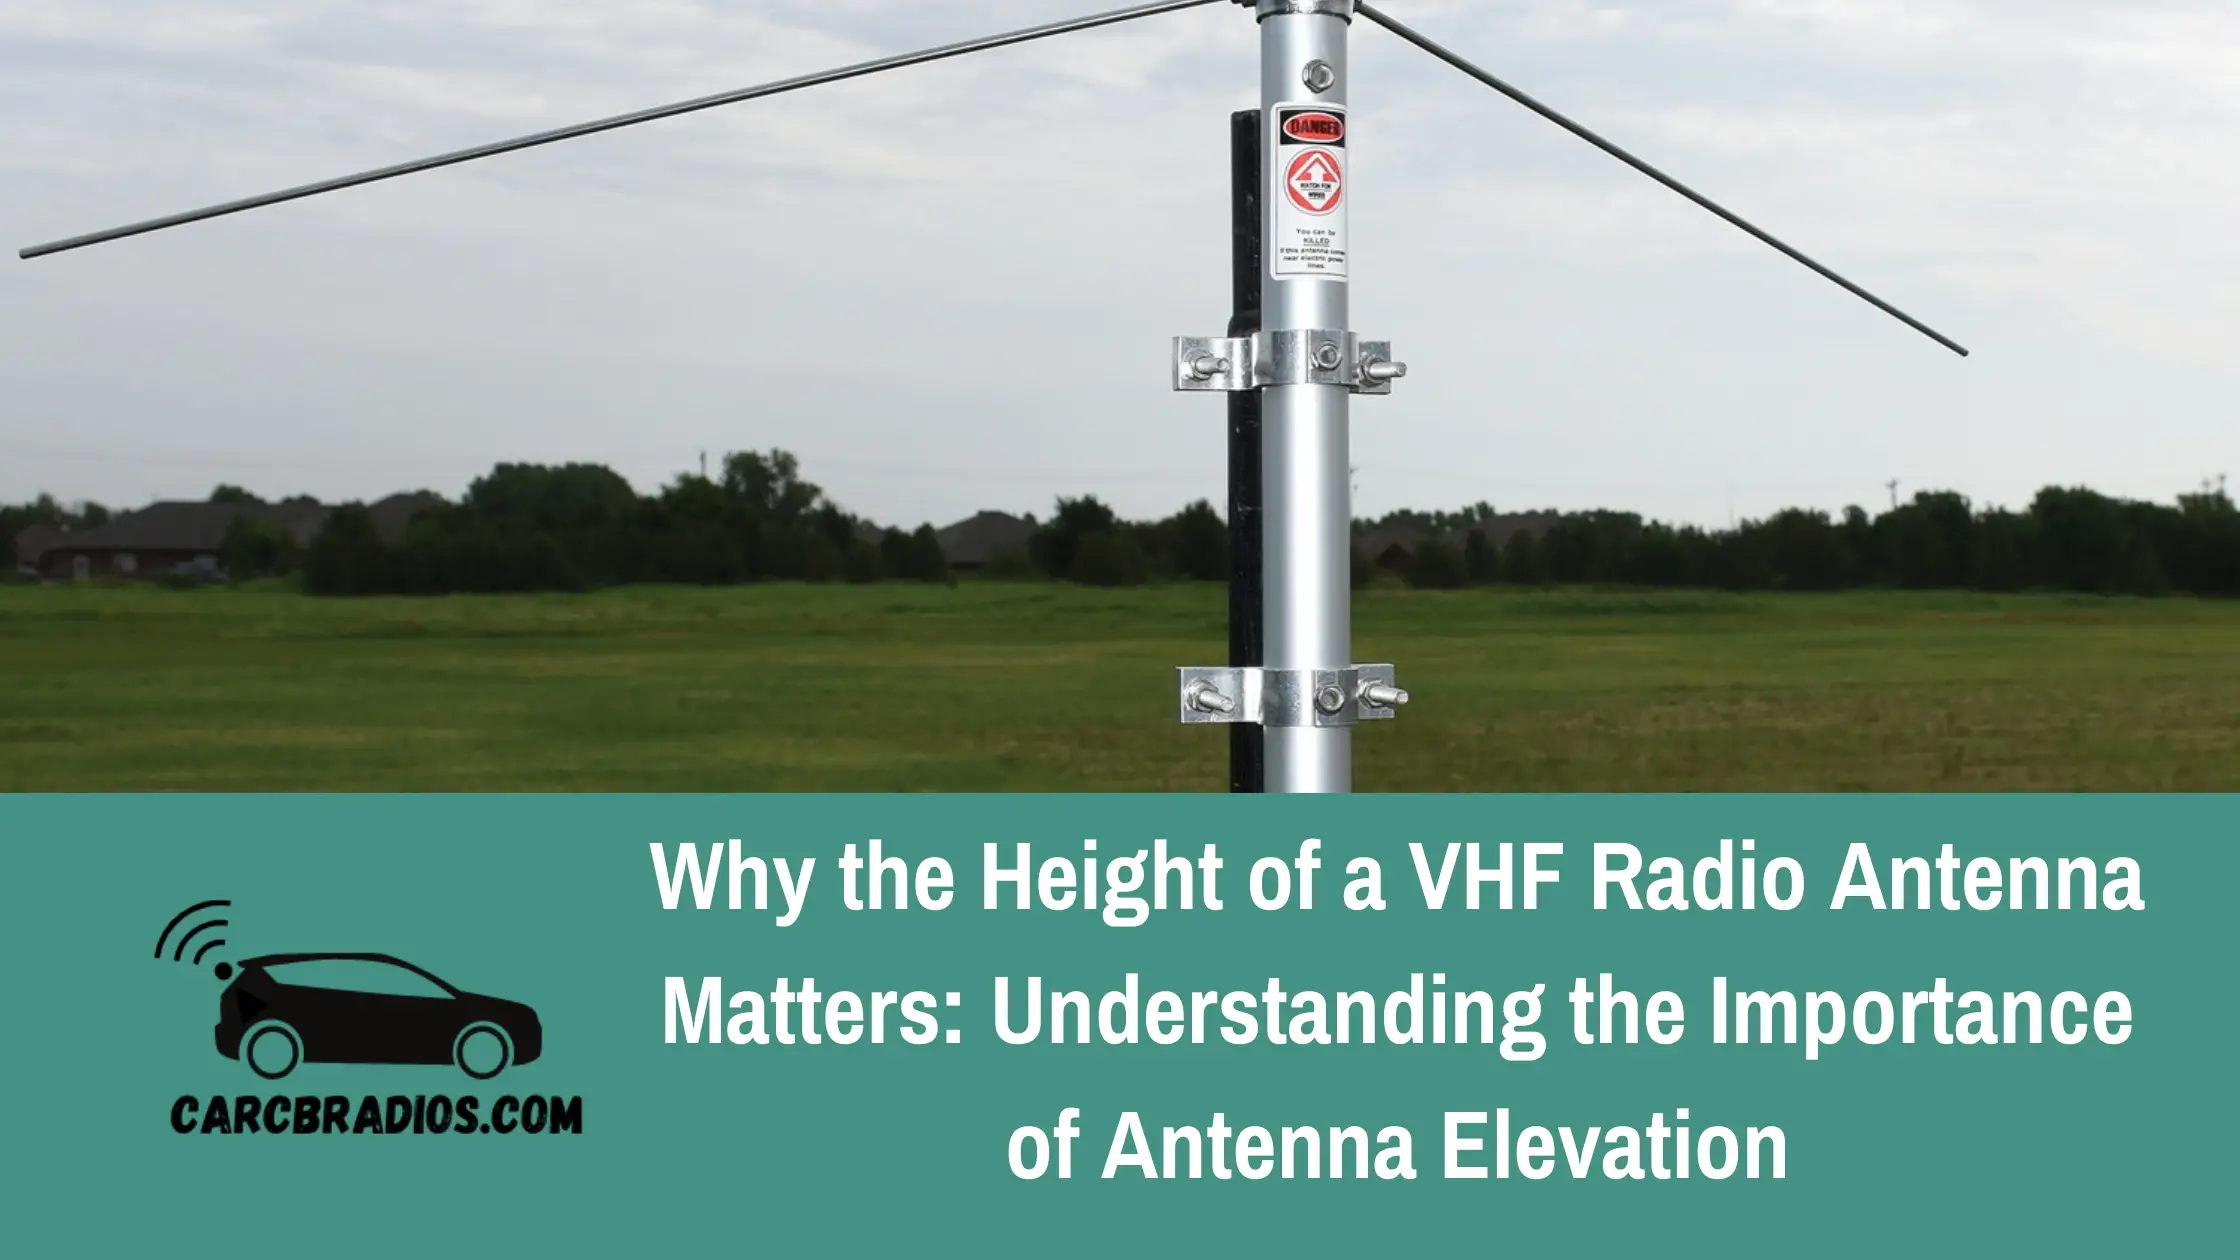 One of the most critical factors to consider when setting up a VHF radio antenna is its height. In this article, I will explain why the height of a VHF radio antenna is important and share some tips on how to ensure a clearer signal.